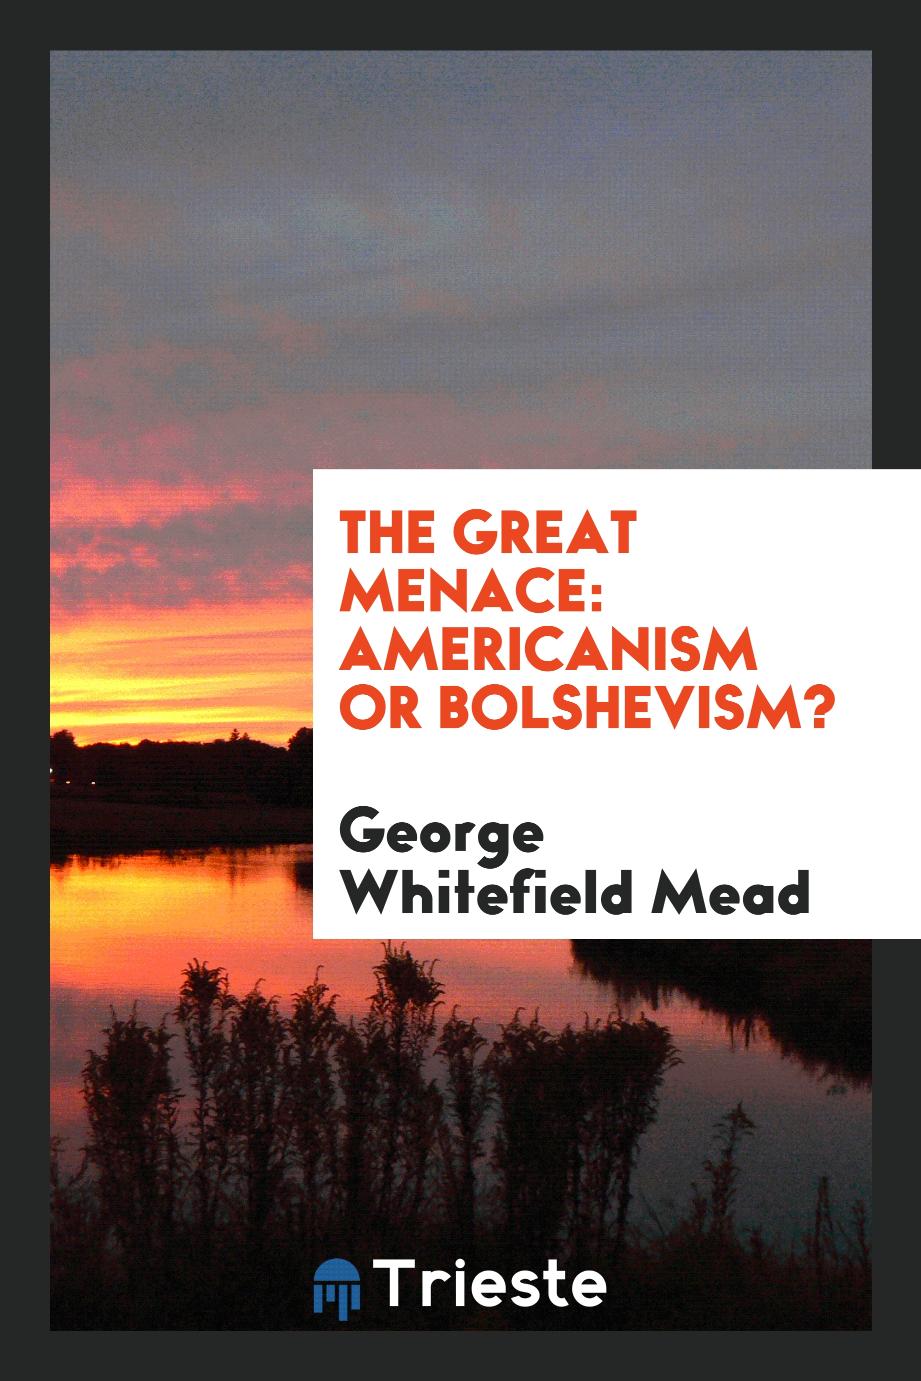 The great menace: Americanism or bolshevism?